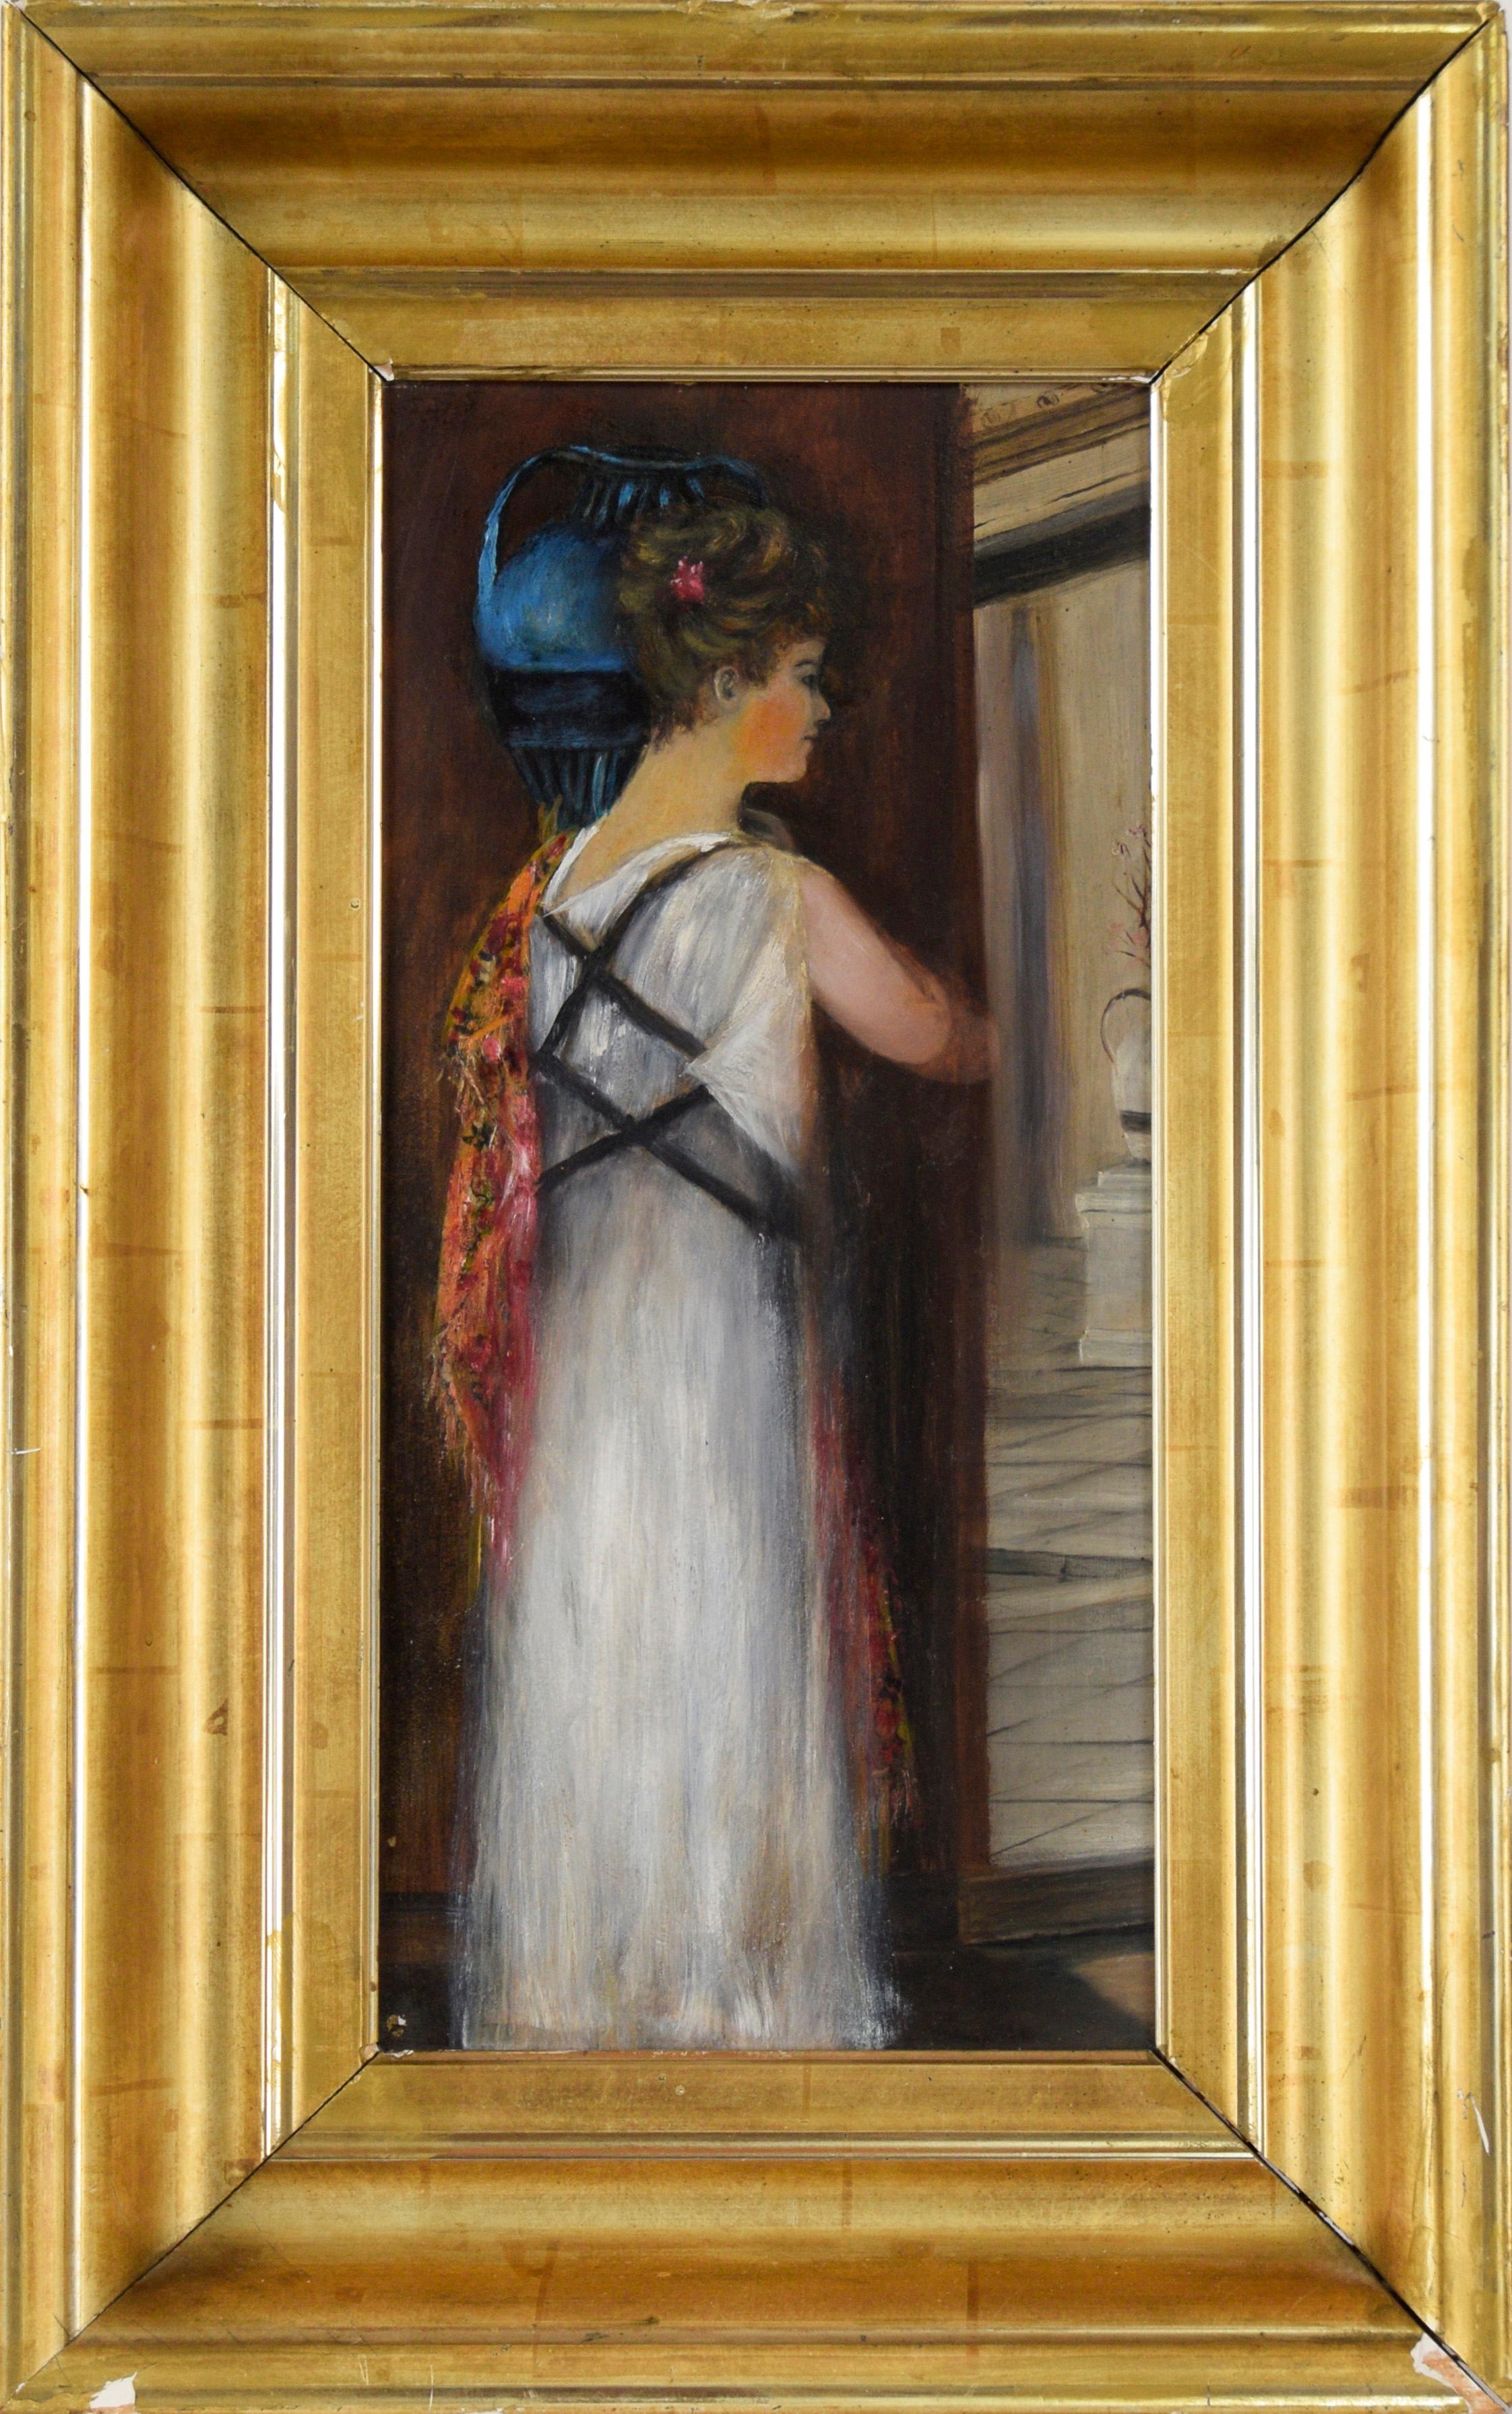 Athenian Woman Carrying a Water Jar In a White Dress - Painting by 19th Century American School